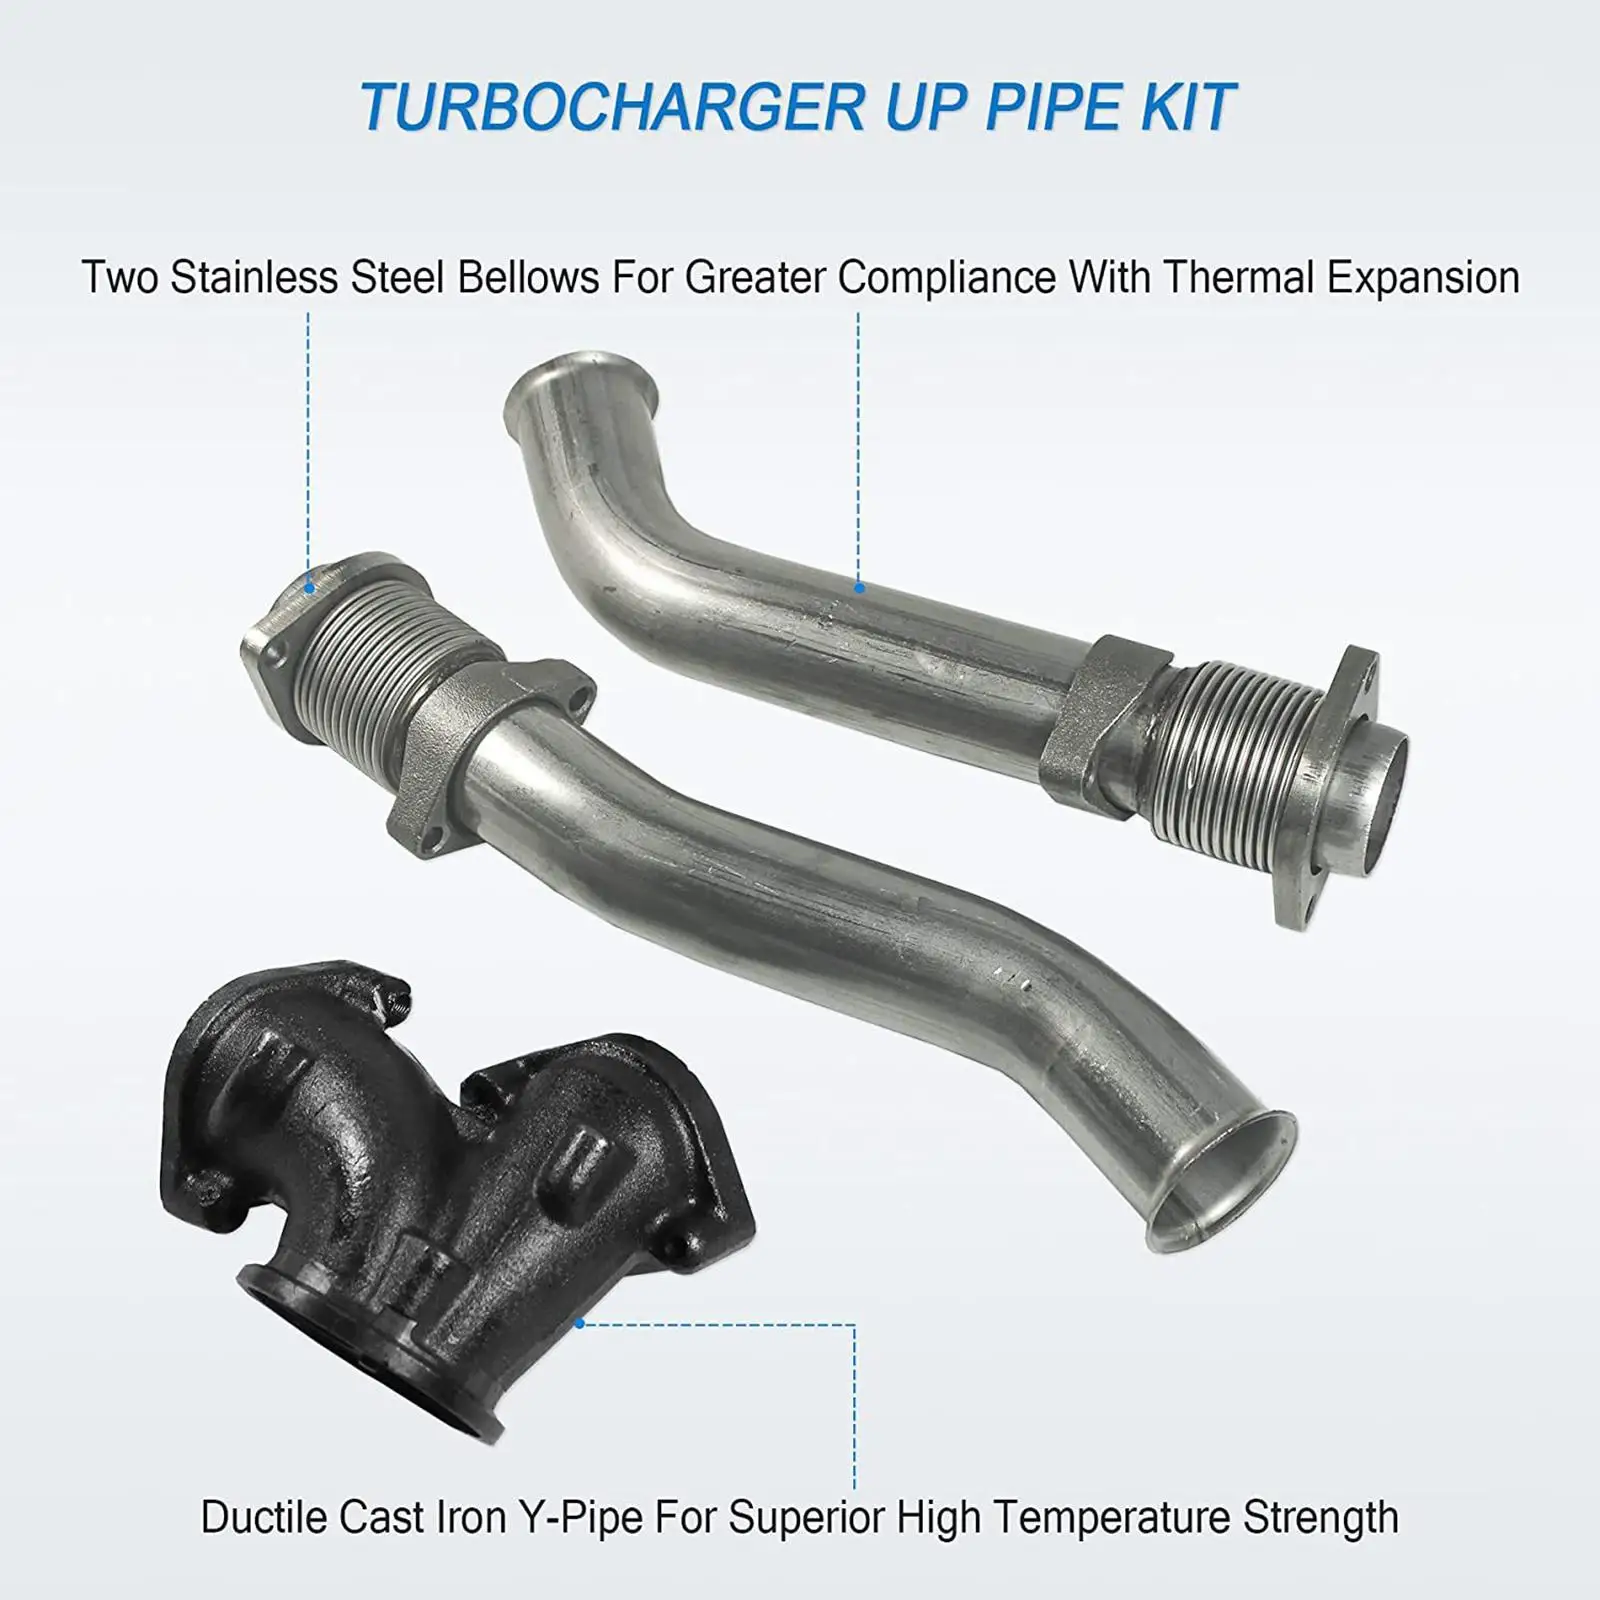 Turbocharger up Pipe Kit 679-005 Replacement Parts Diesel Turbine Pipe Kit for